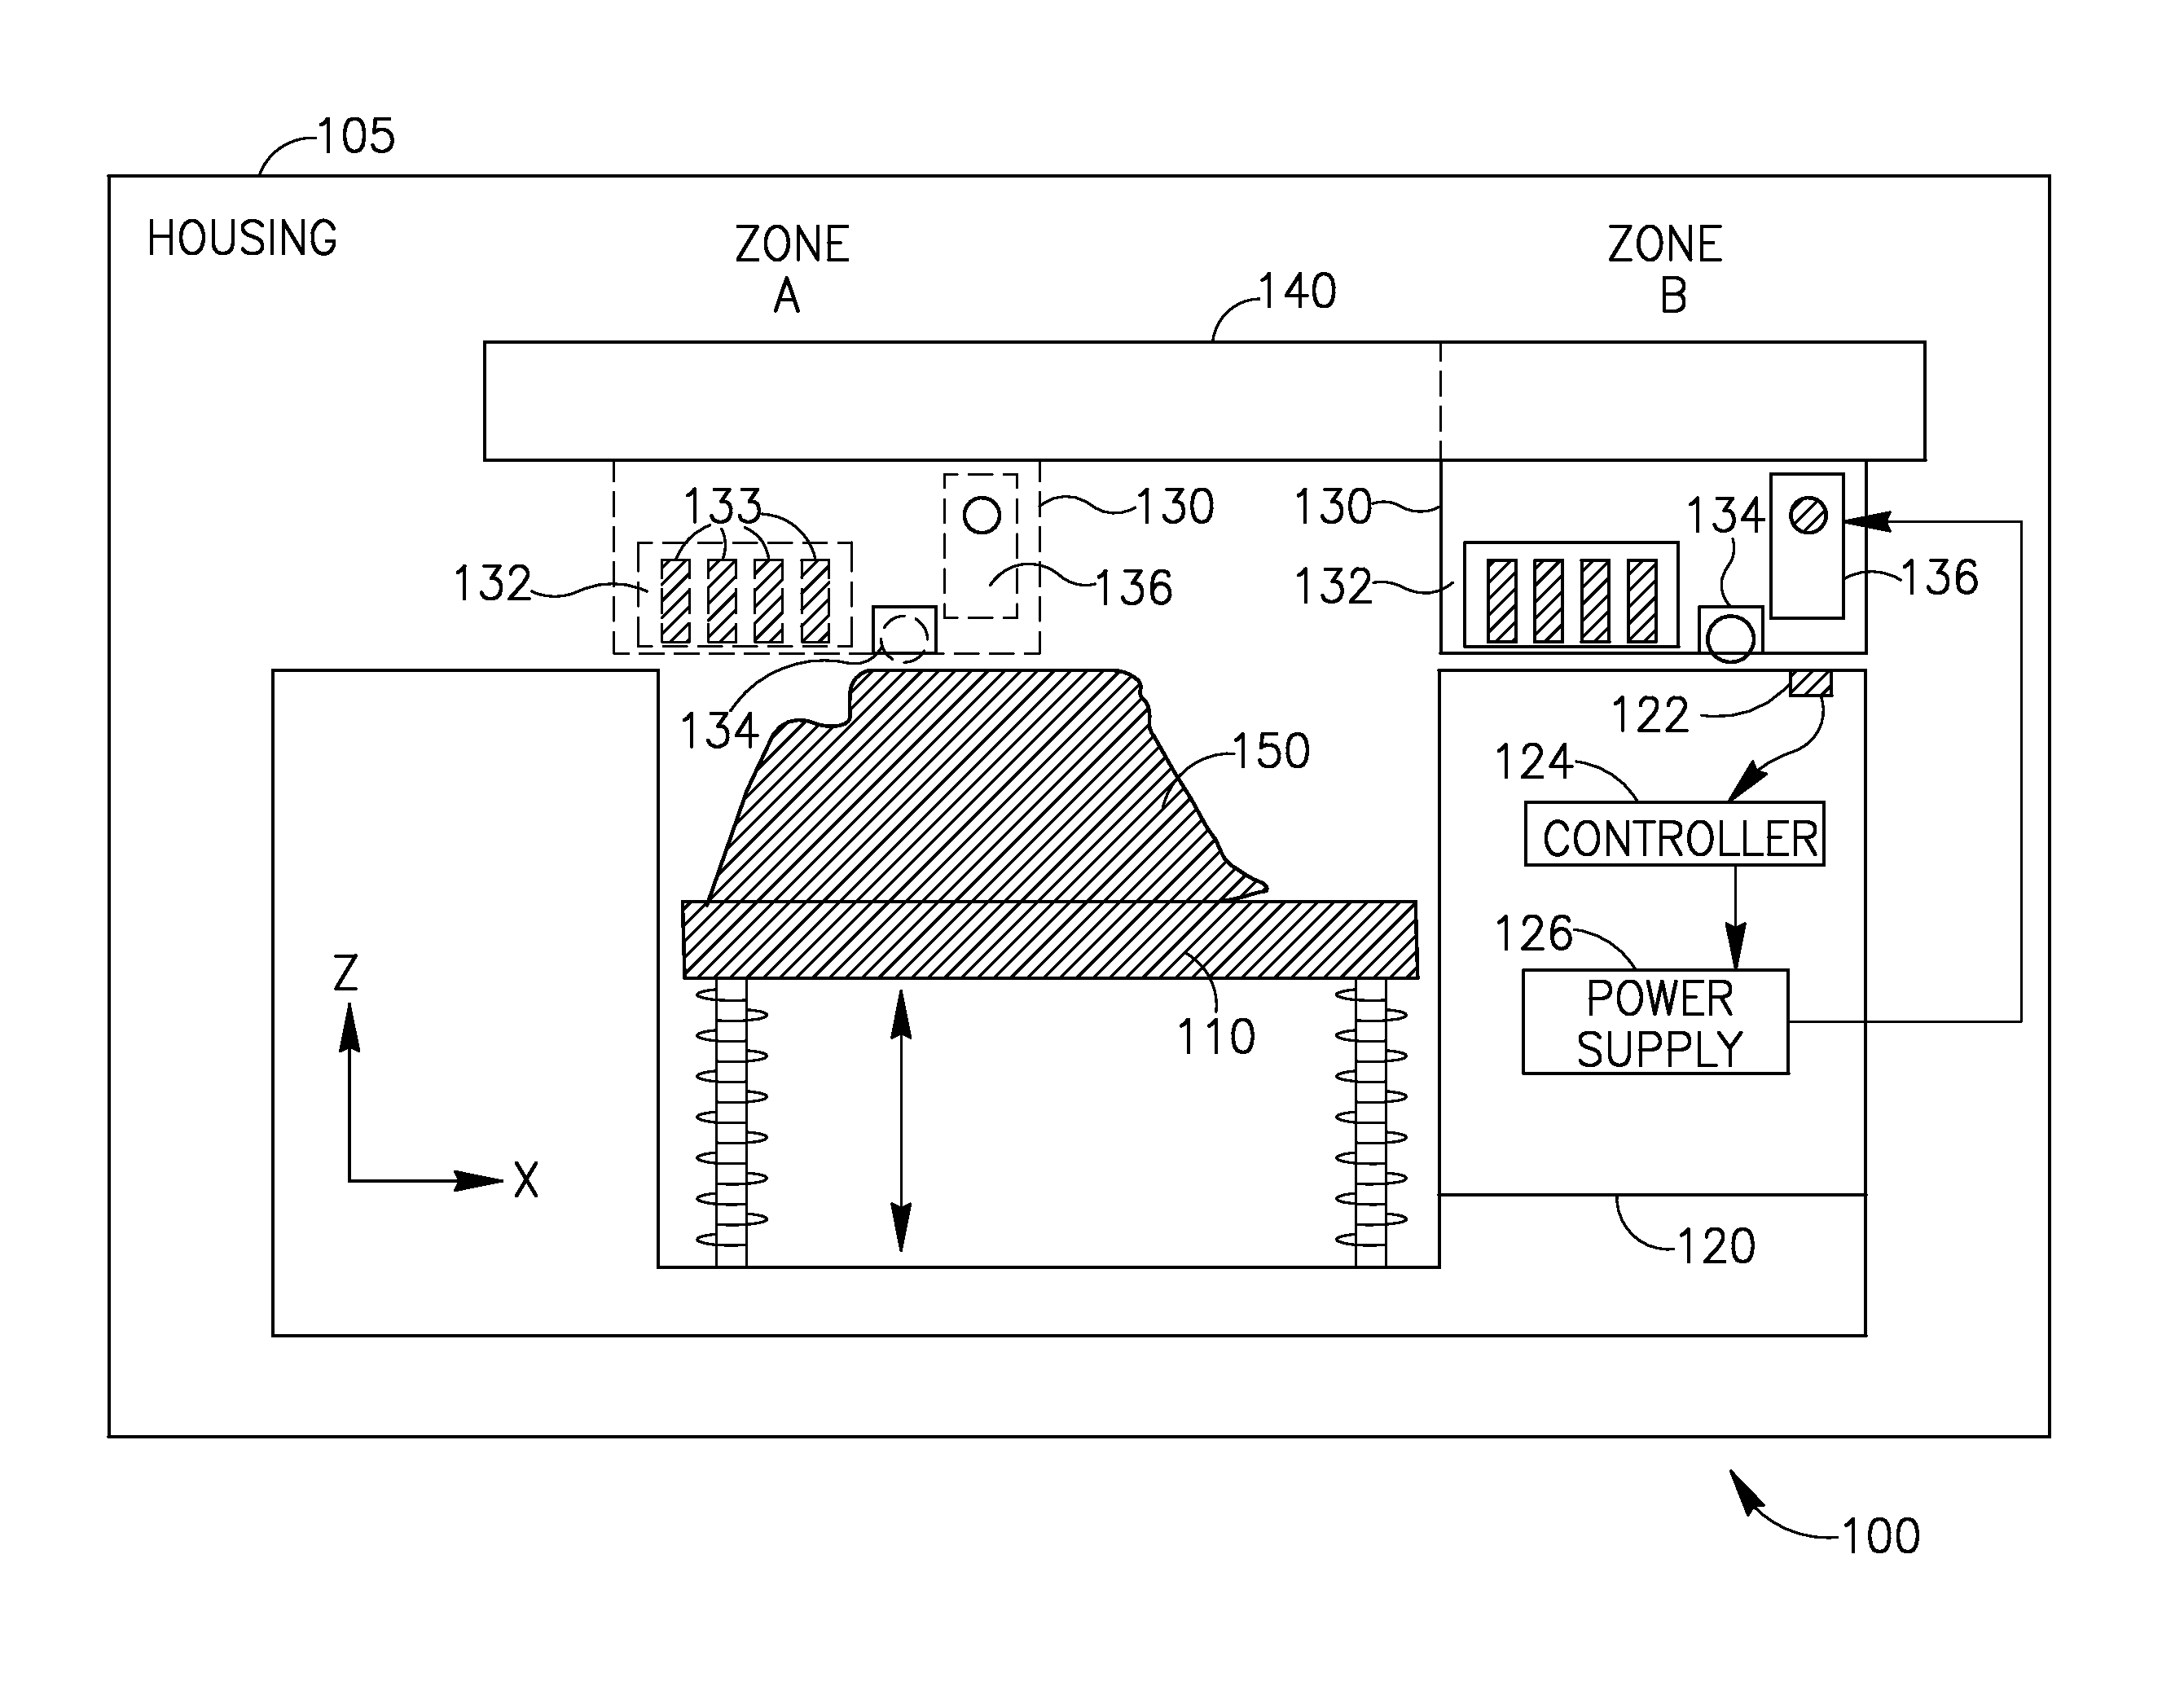 Method and apparatus for monitoring electro-magnetic radiation power in solid freeform fabrication systems